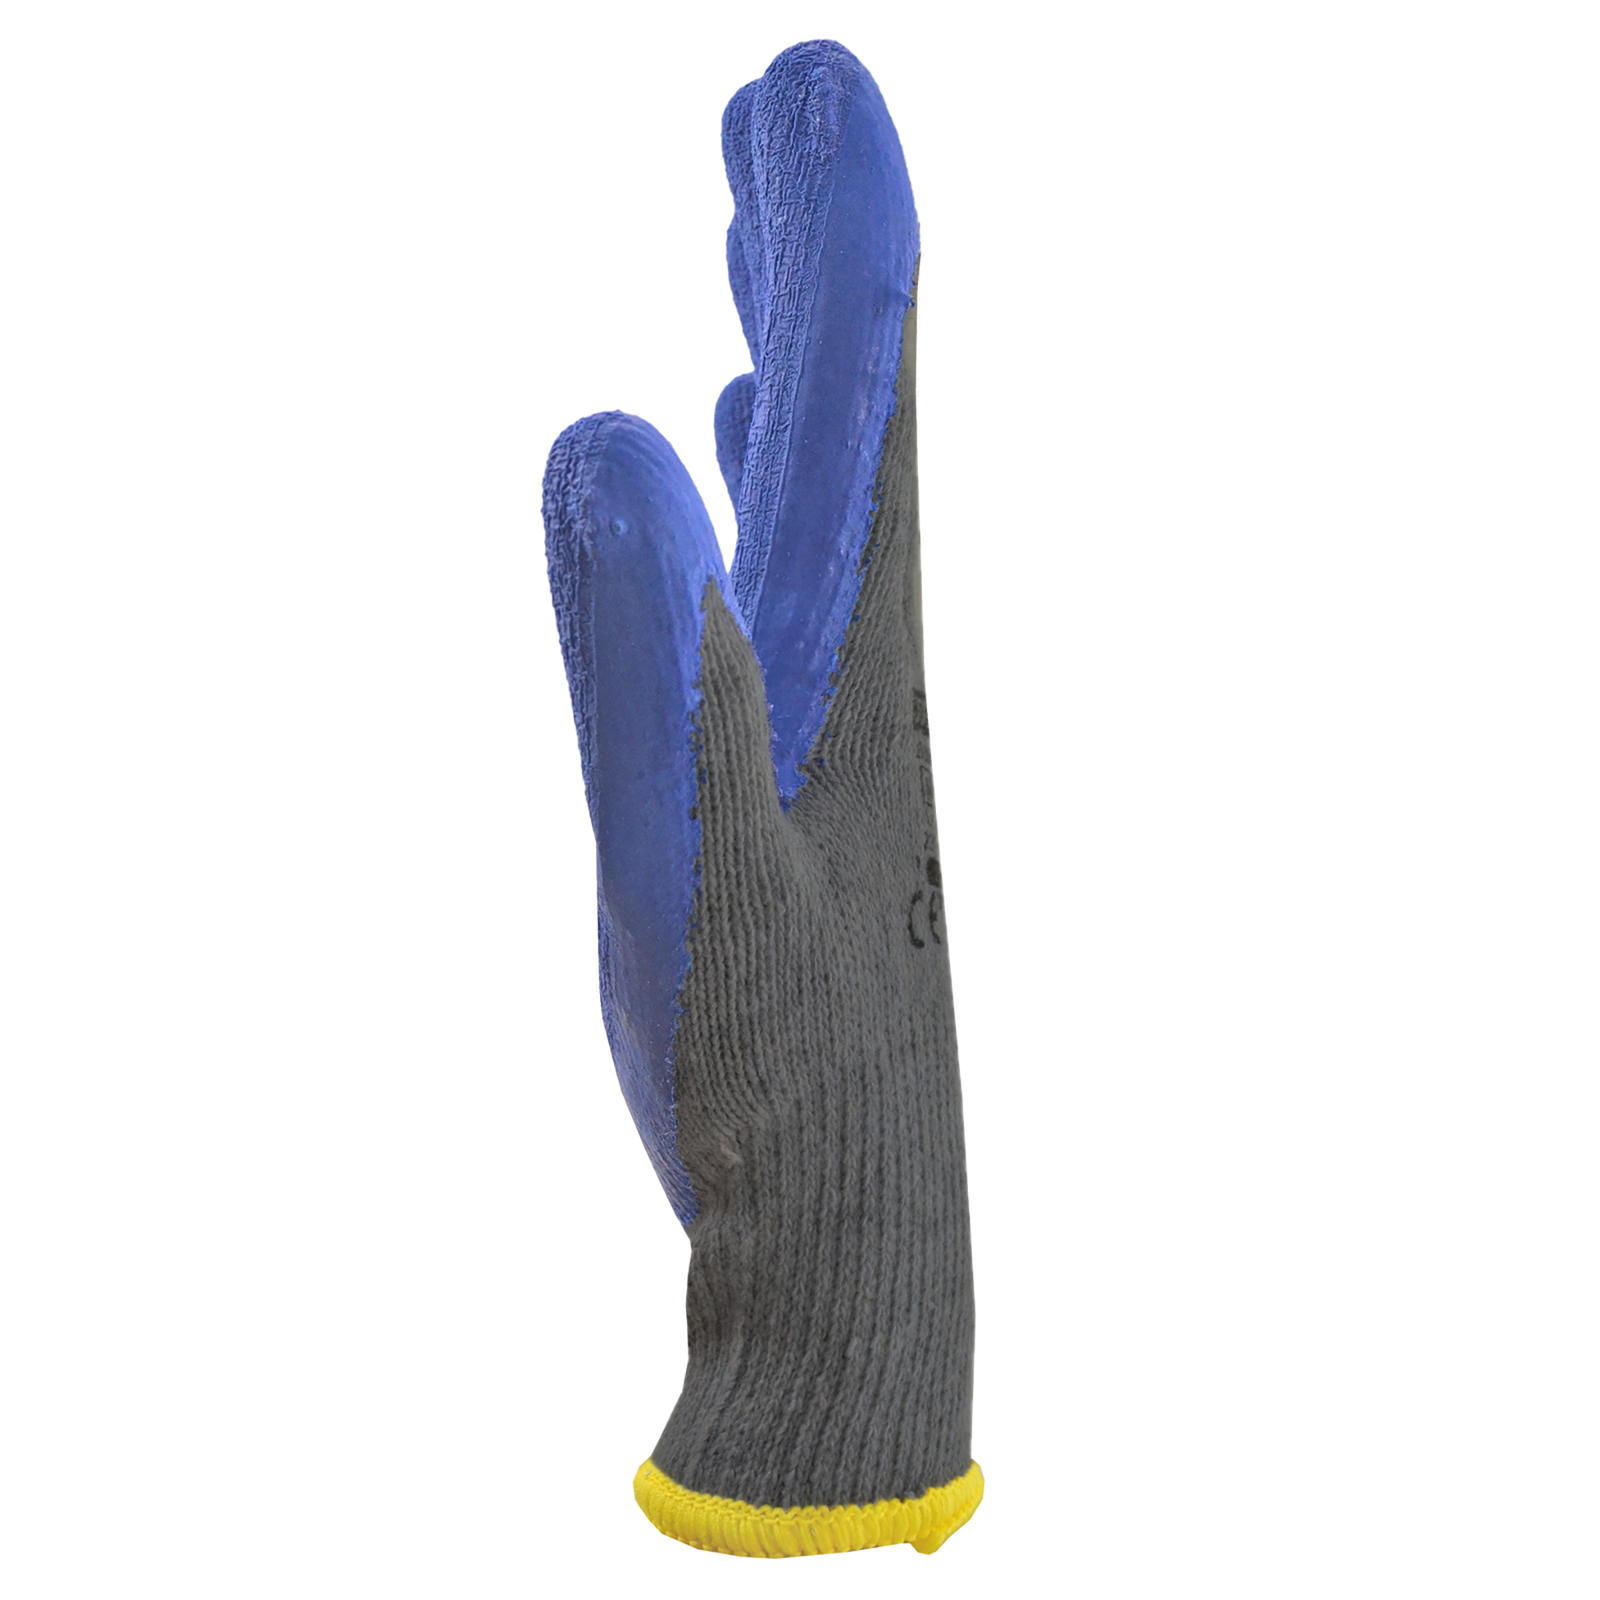 Safety Work Gloves with Crinkle Latex Dipped Palms – Pack of 12